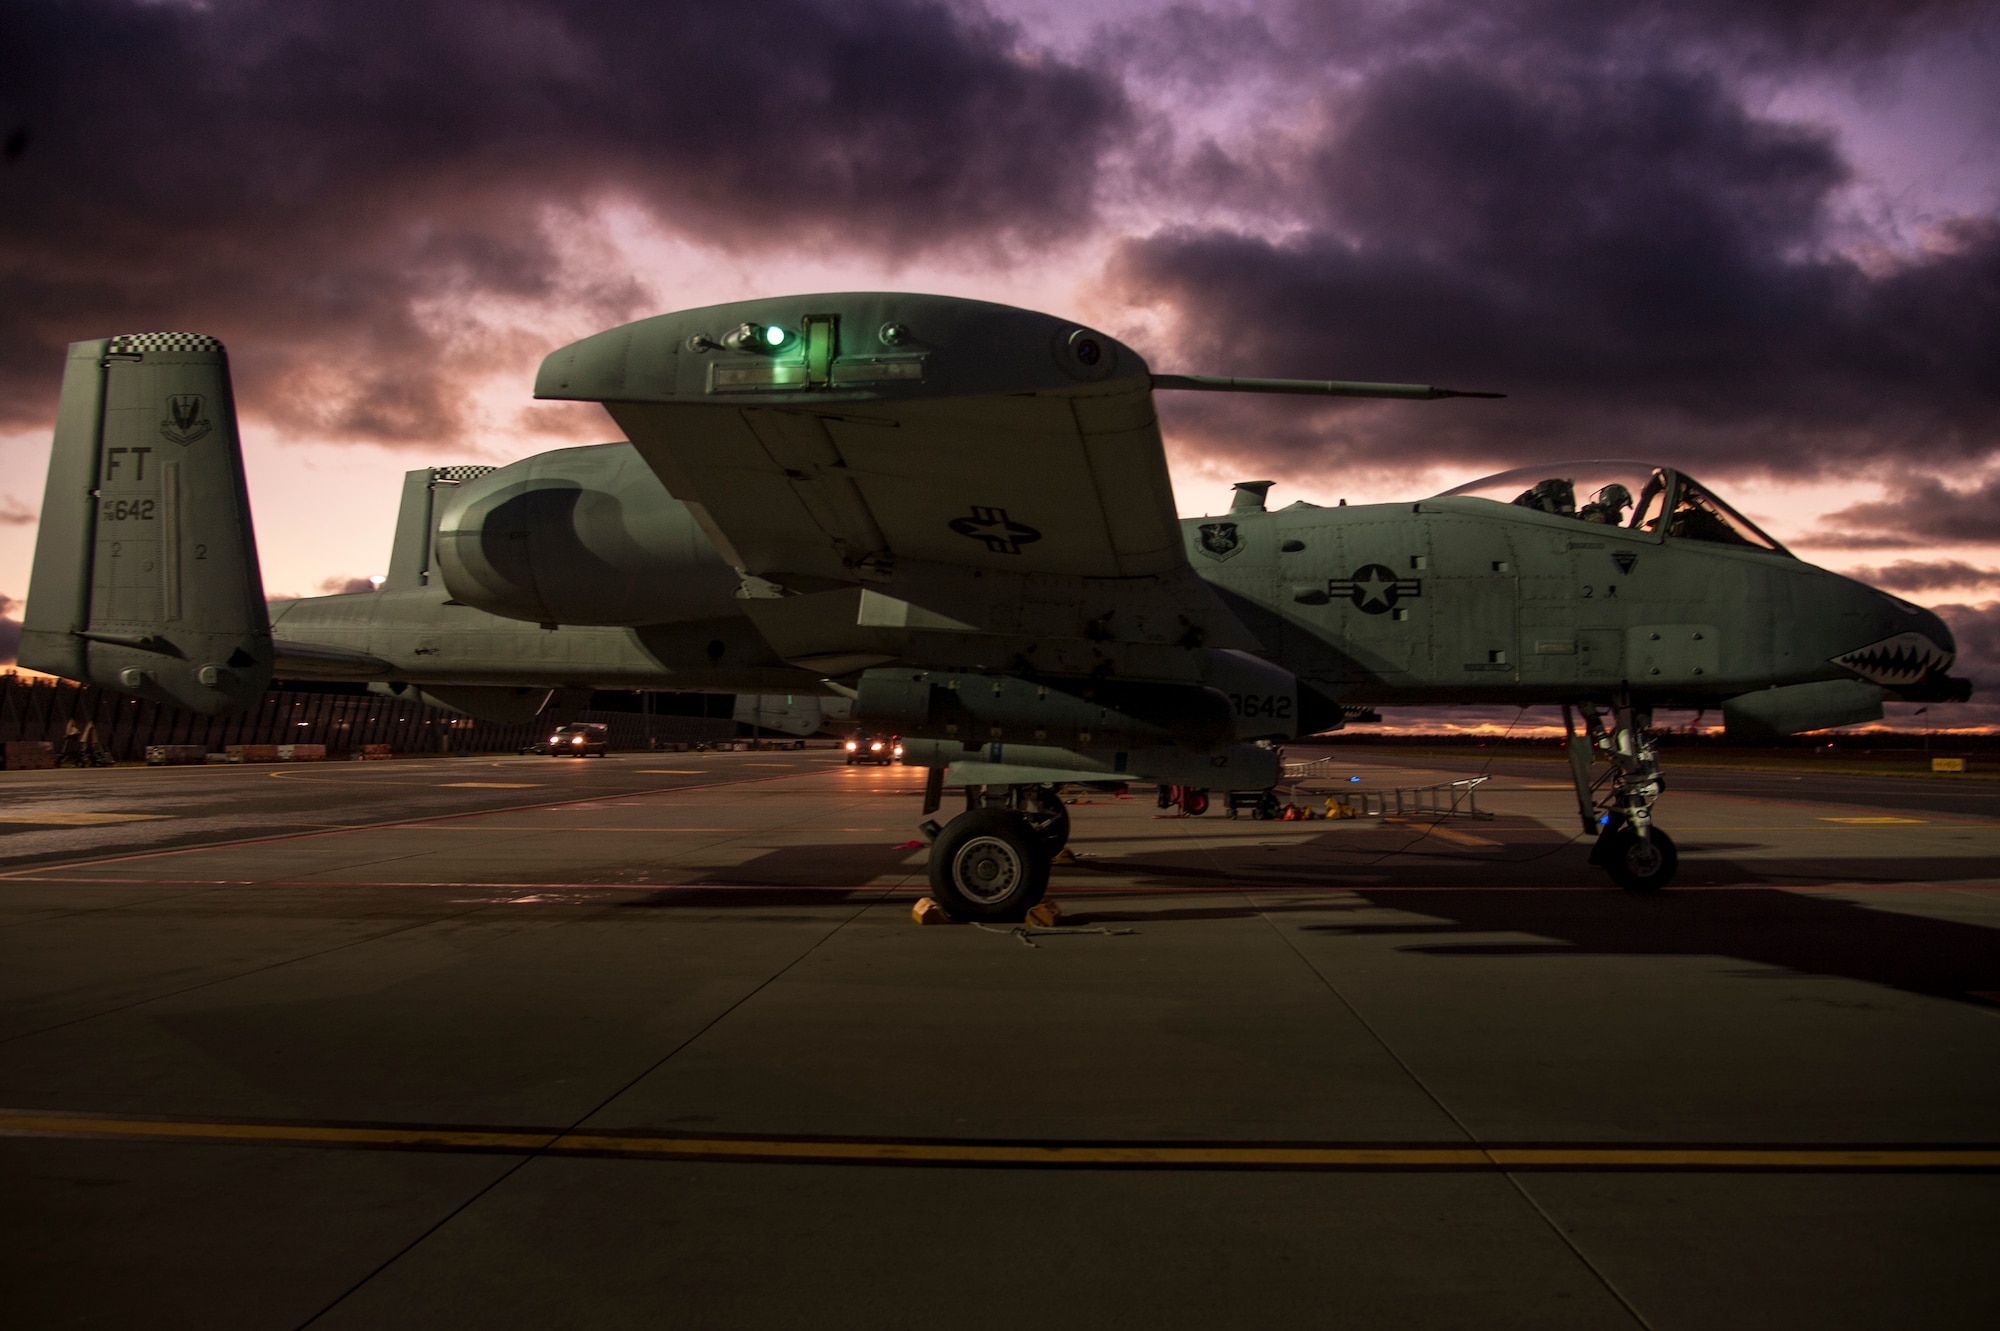 An A-10 Thunderbolt II attack aircraft, assigned to the 74th Expeditionary Fighter Squadron sits on the flightline during pre-flight inspections, Nov. 11, 2015, at Amari Air Base, Estonia. The 74th EFS aircraft are deployed from the 23d Wing at Moody Air Force Base, Ga., as part of theater security package in support of Operation Atlantic Resolve. (U.S. Air Force photo by Andrea Jenkins/Released)